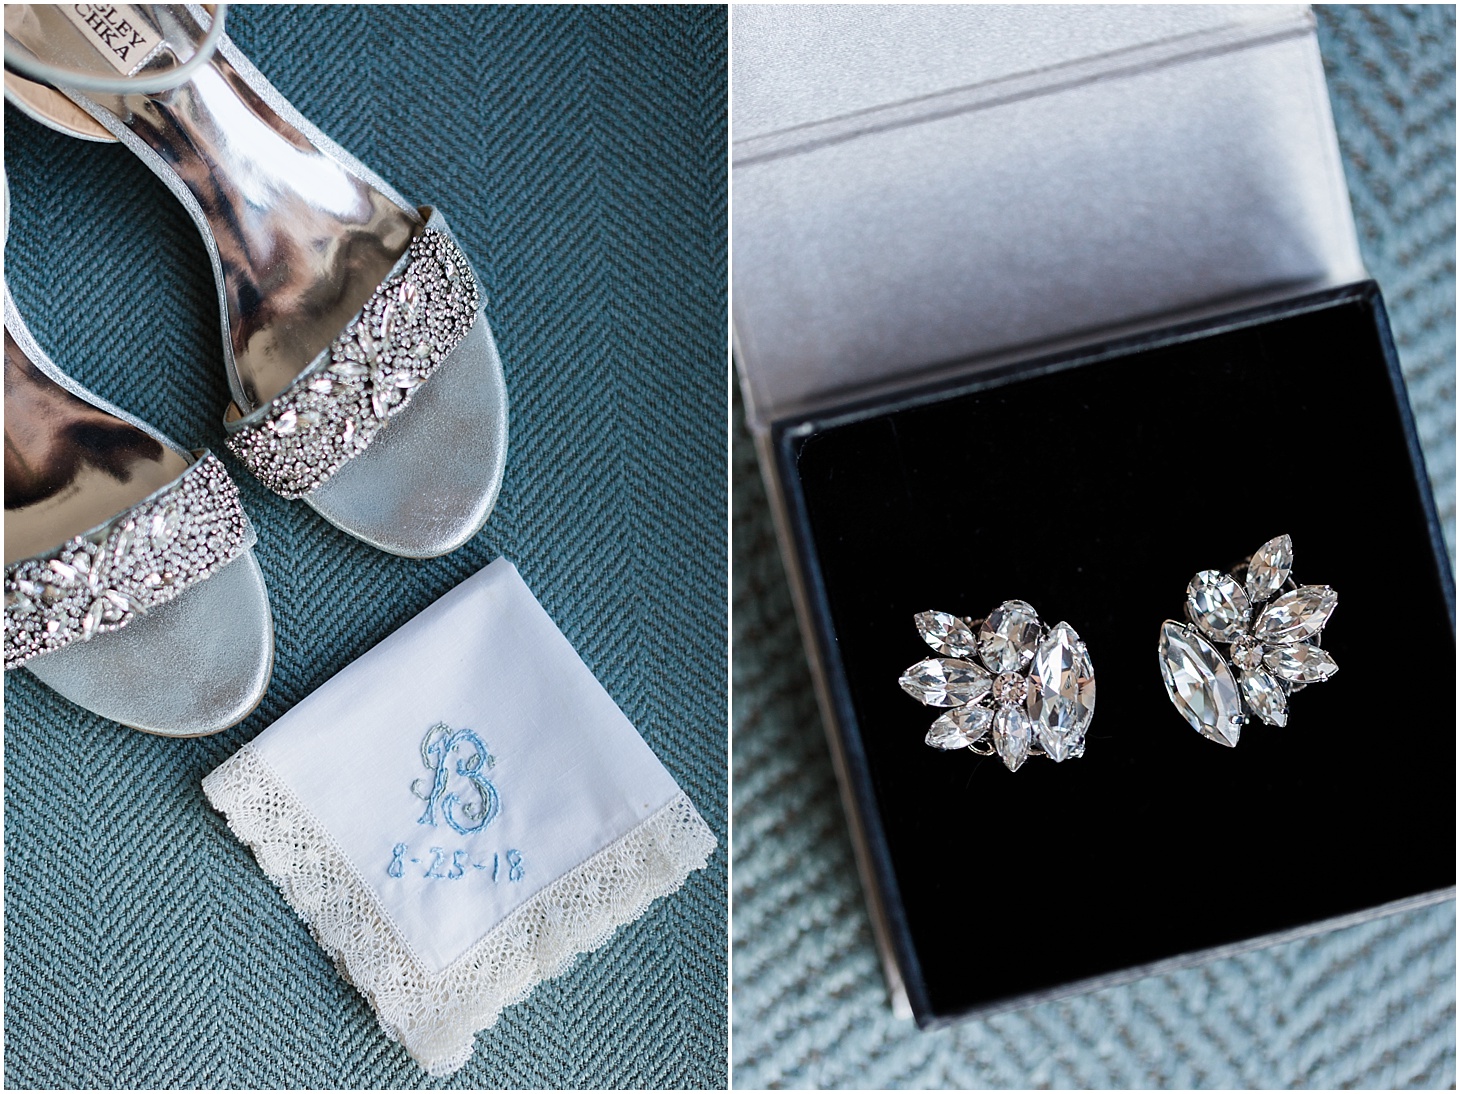 Badgley Mischka Wedding Shoes and Bridal Details | Southern Magnolia Wedding at the Naval Academy and Gibson Island Club | Sarah Bradshaw Photography